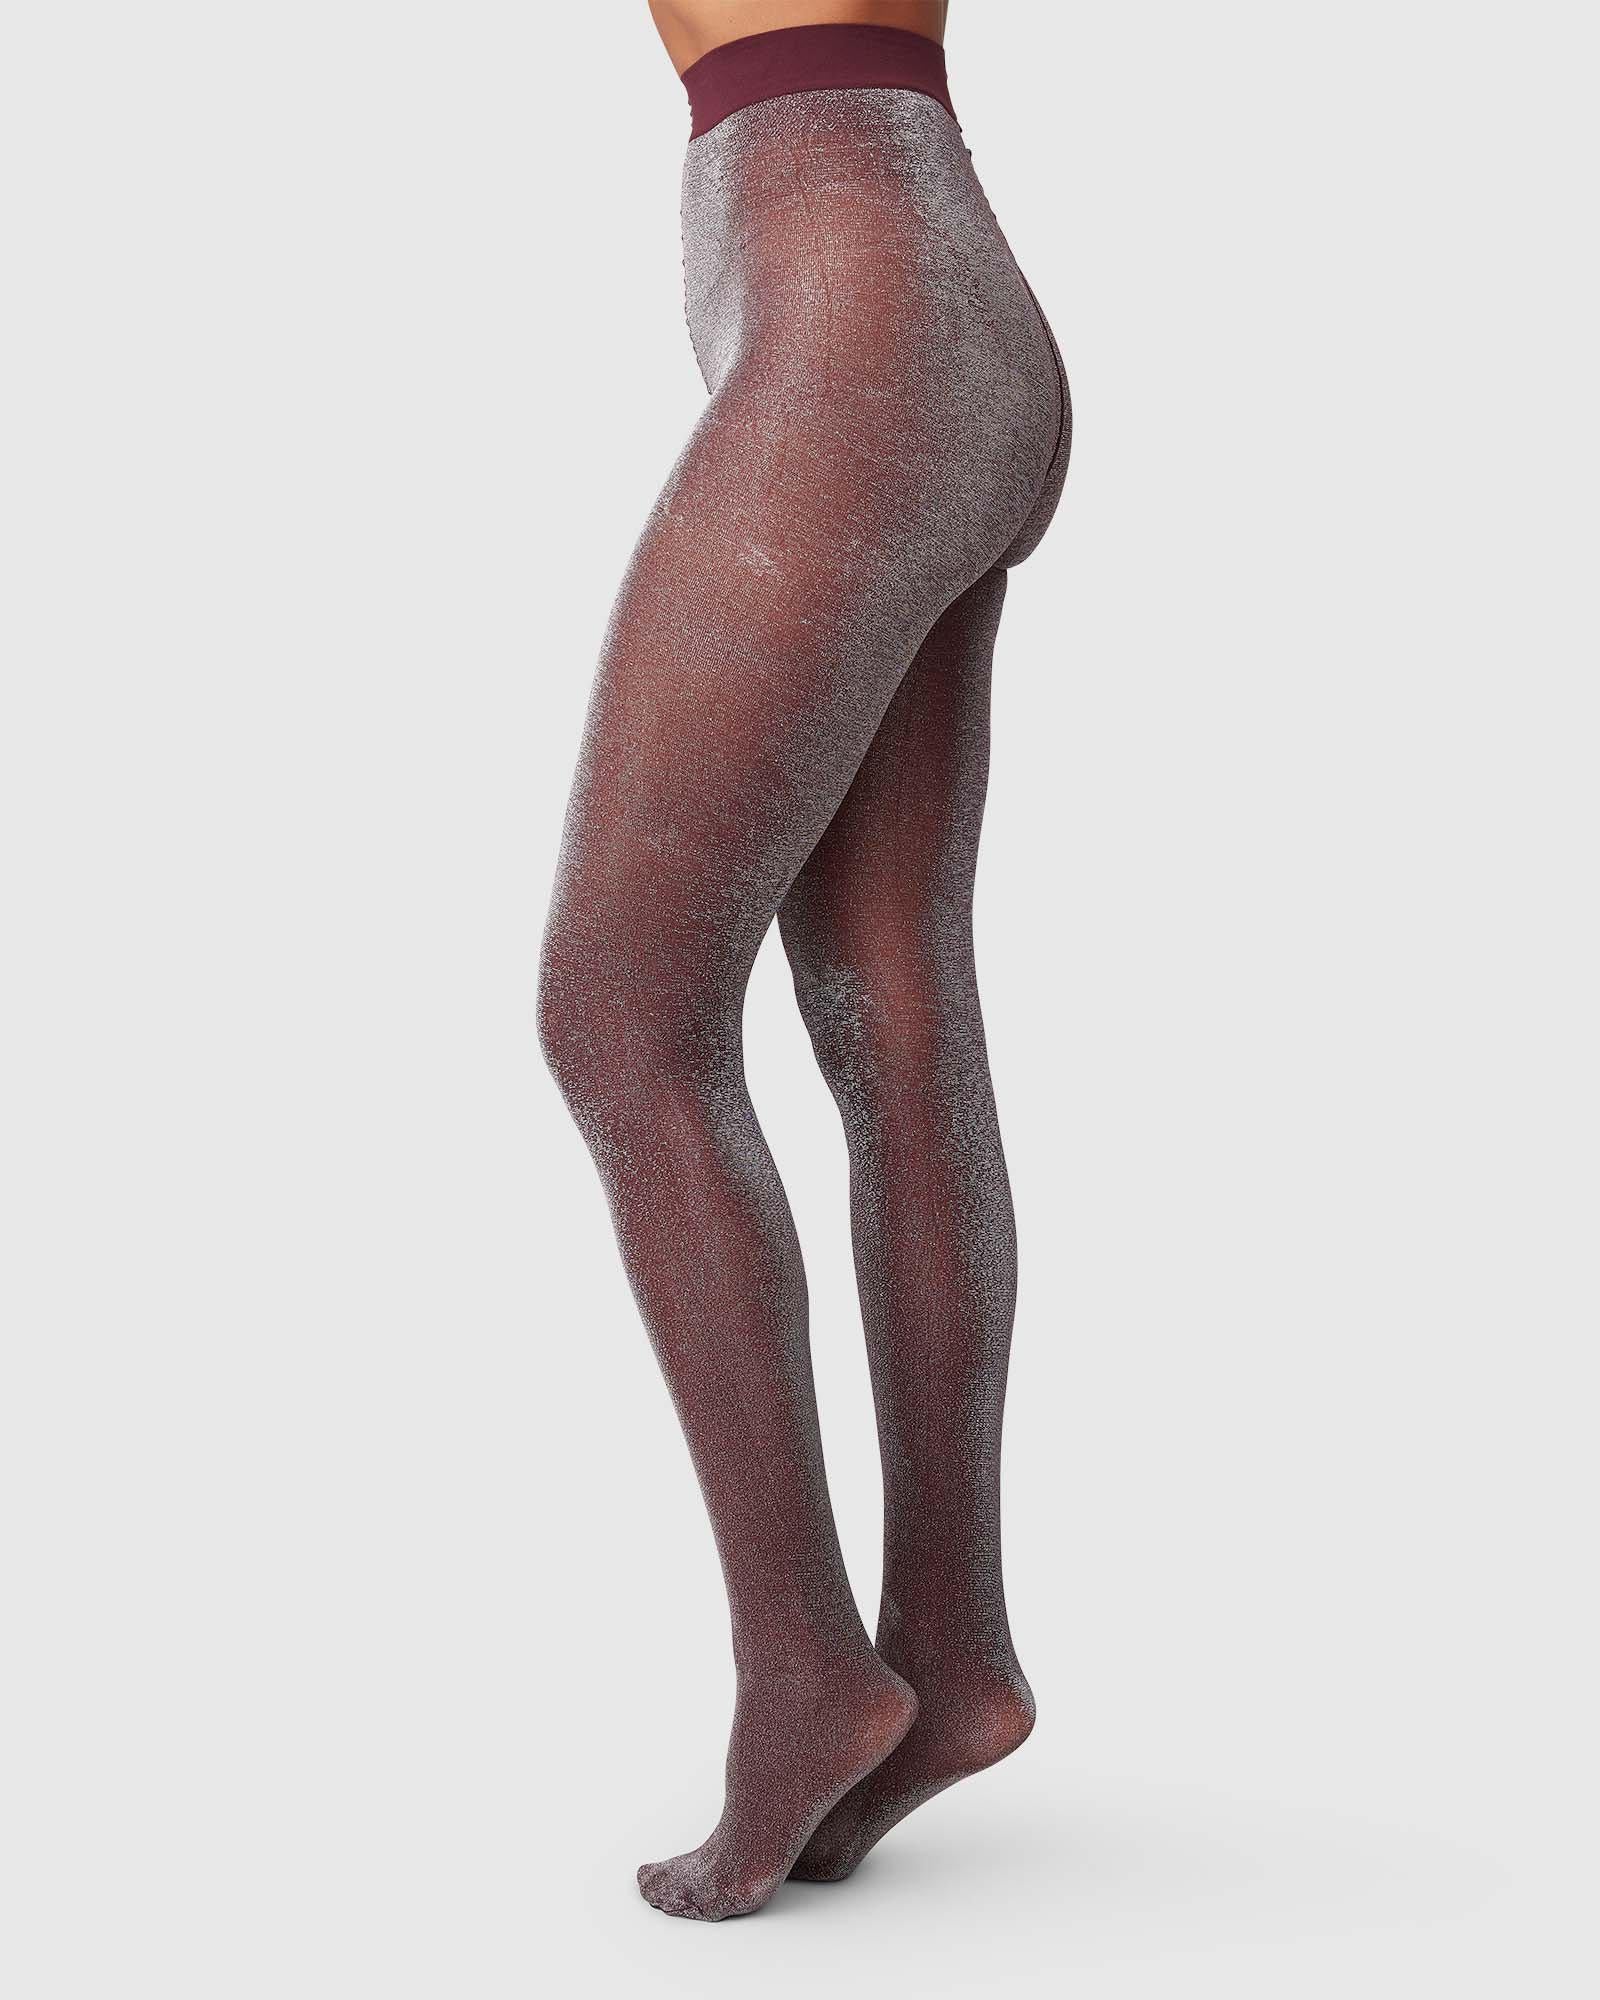 Gold Lurex Shimmer Pantyhose Tights One Size -  Canada